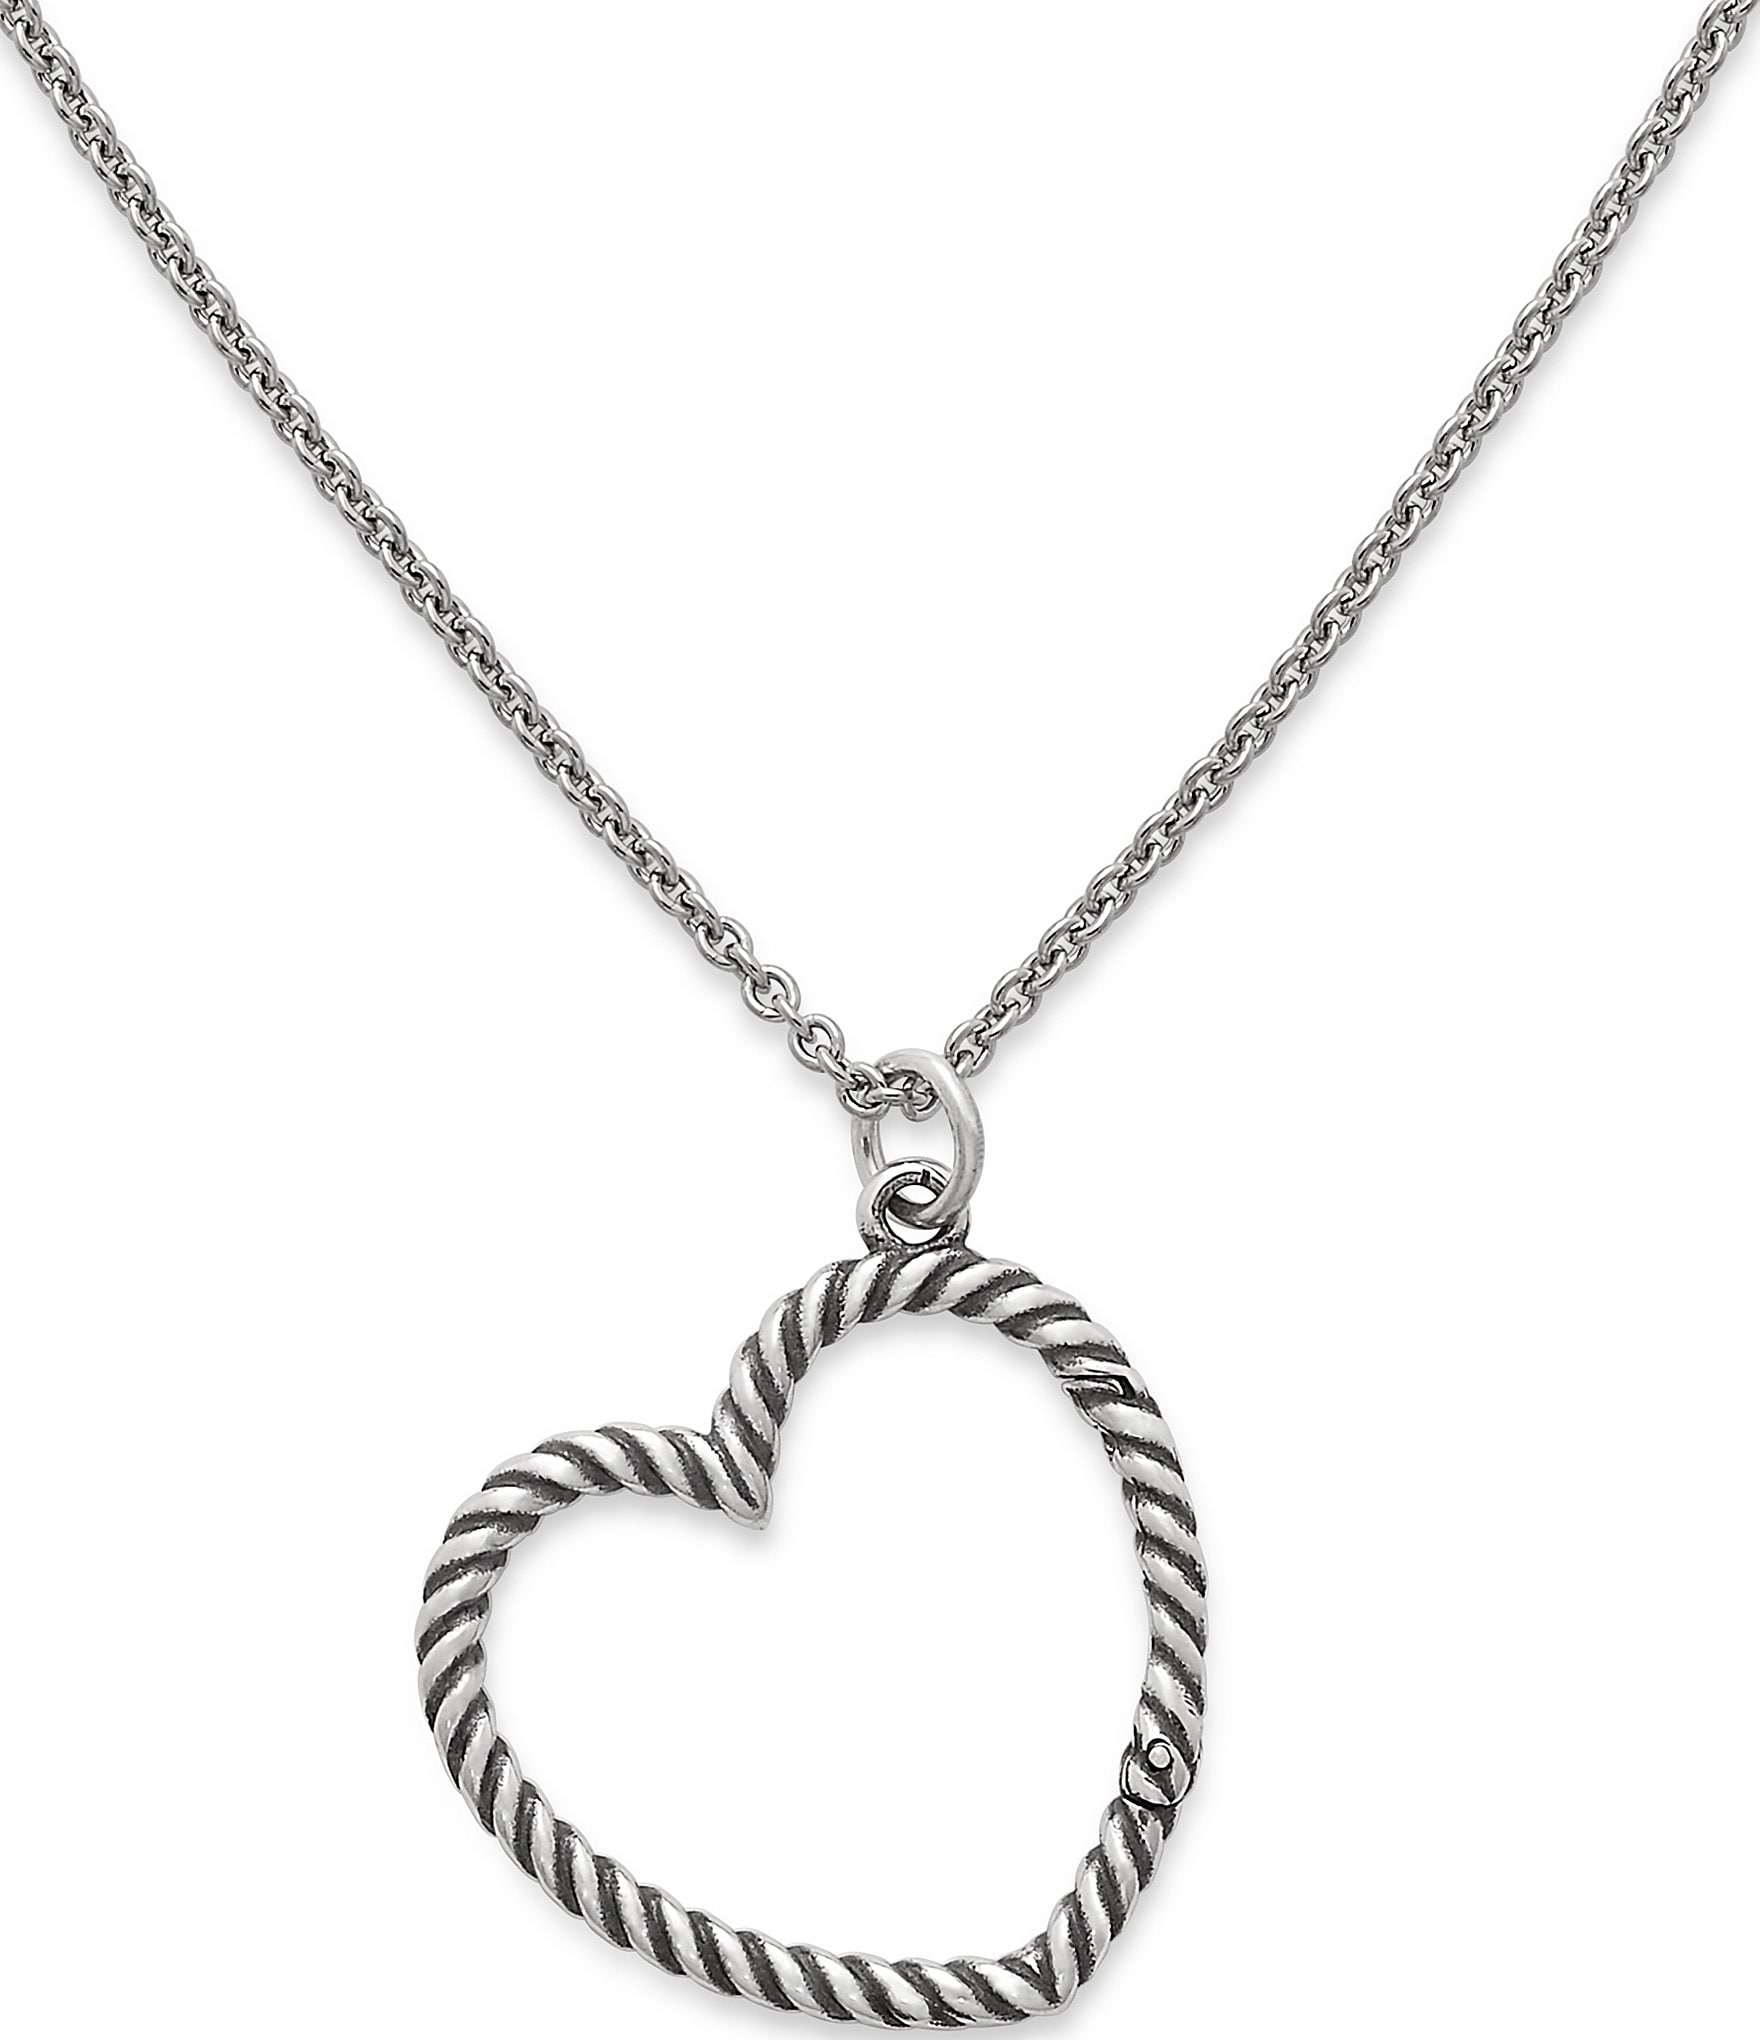 https://dimg.dillards.com/is/image/DillardsZoom/zoom/james-avery-changeable-heart-charm-holder-necklace/05758511_zi_sterling_silver.jpg